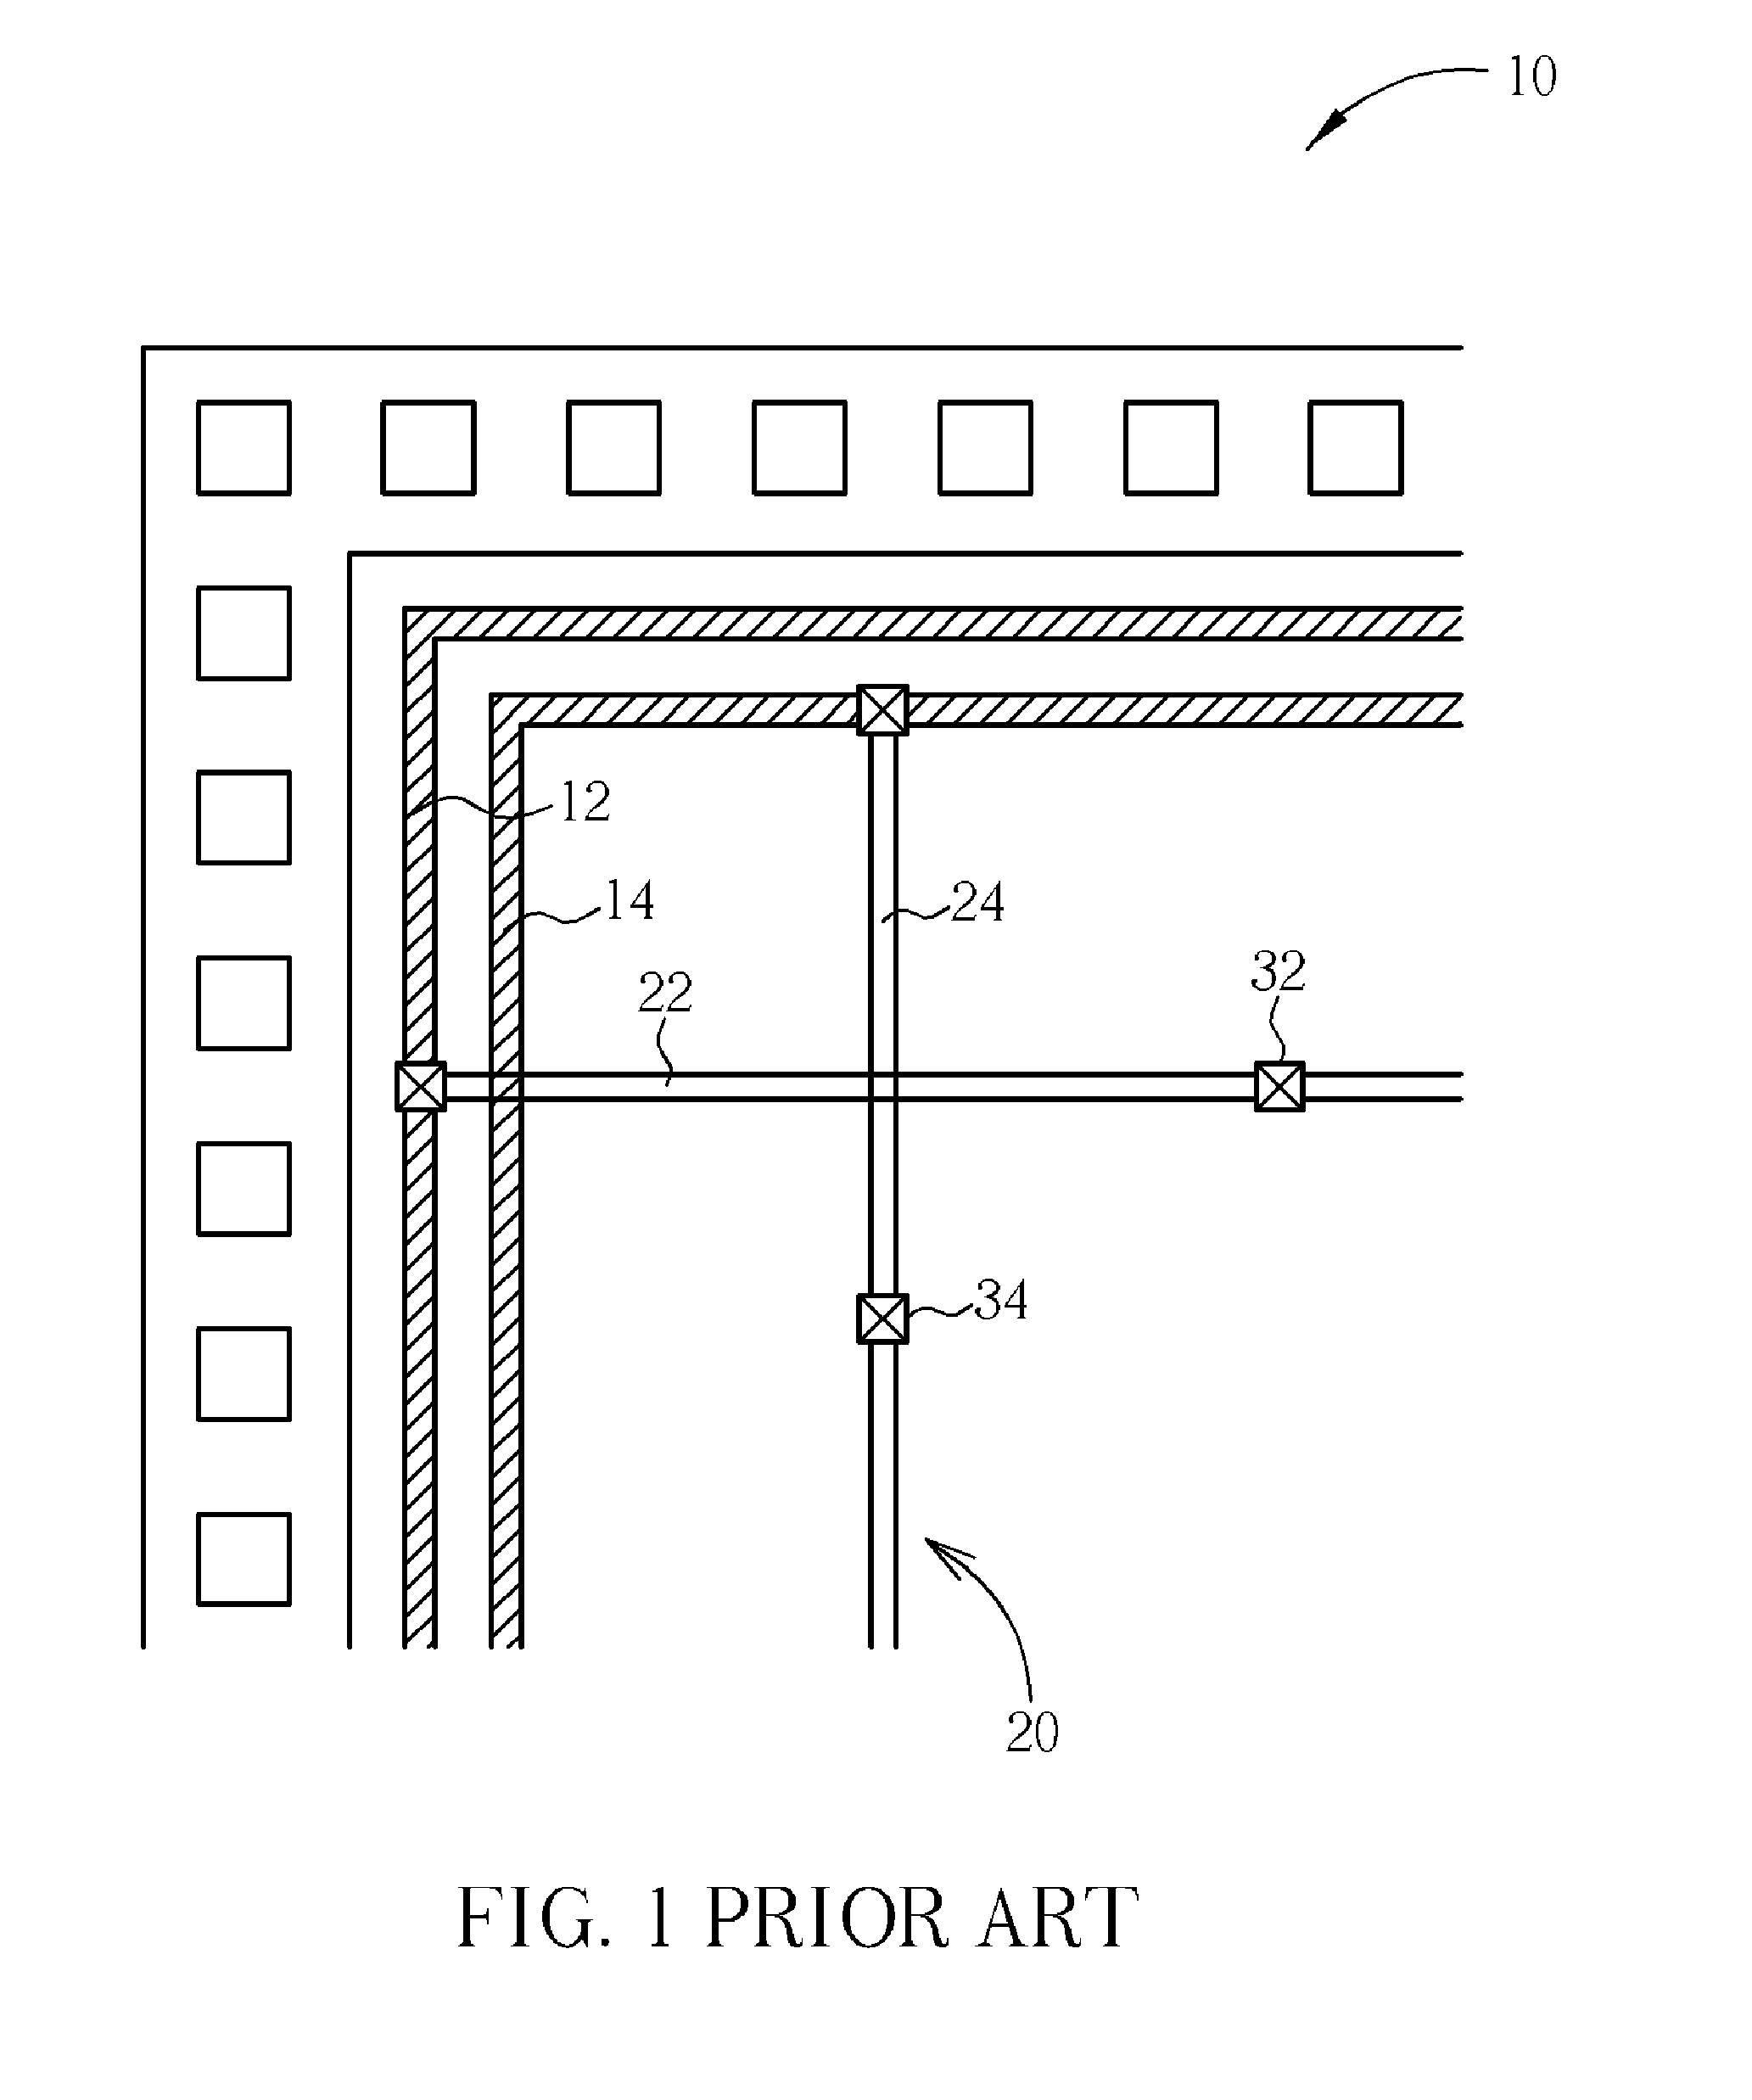 Power and ground routing of integrated circuit devices with improved ir drop and chip performance